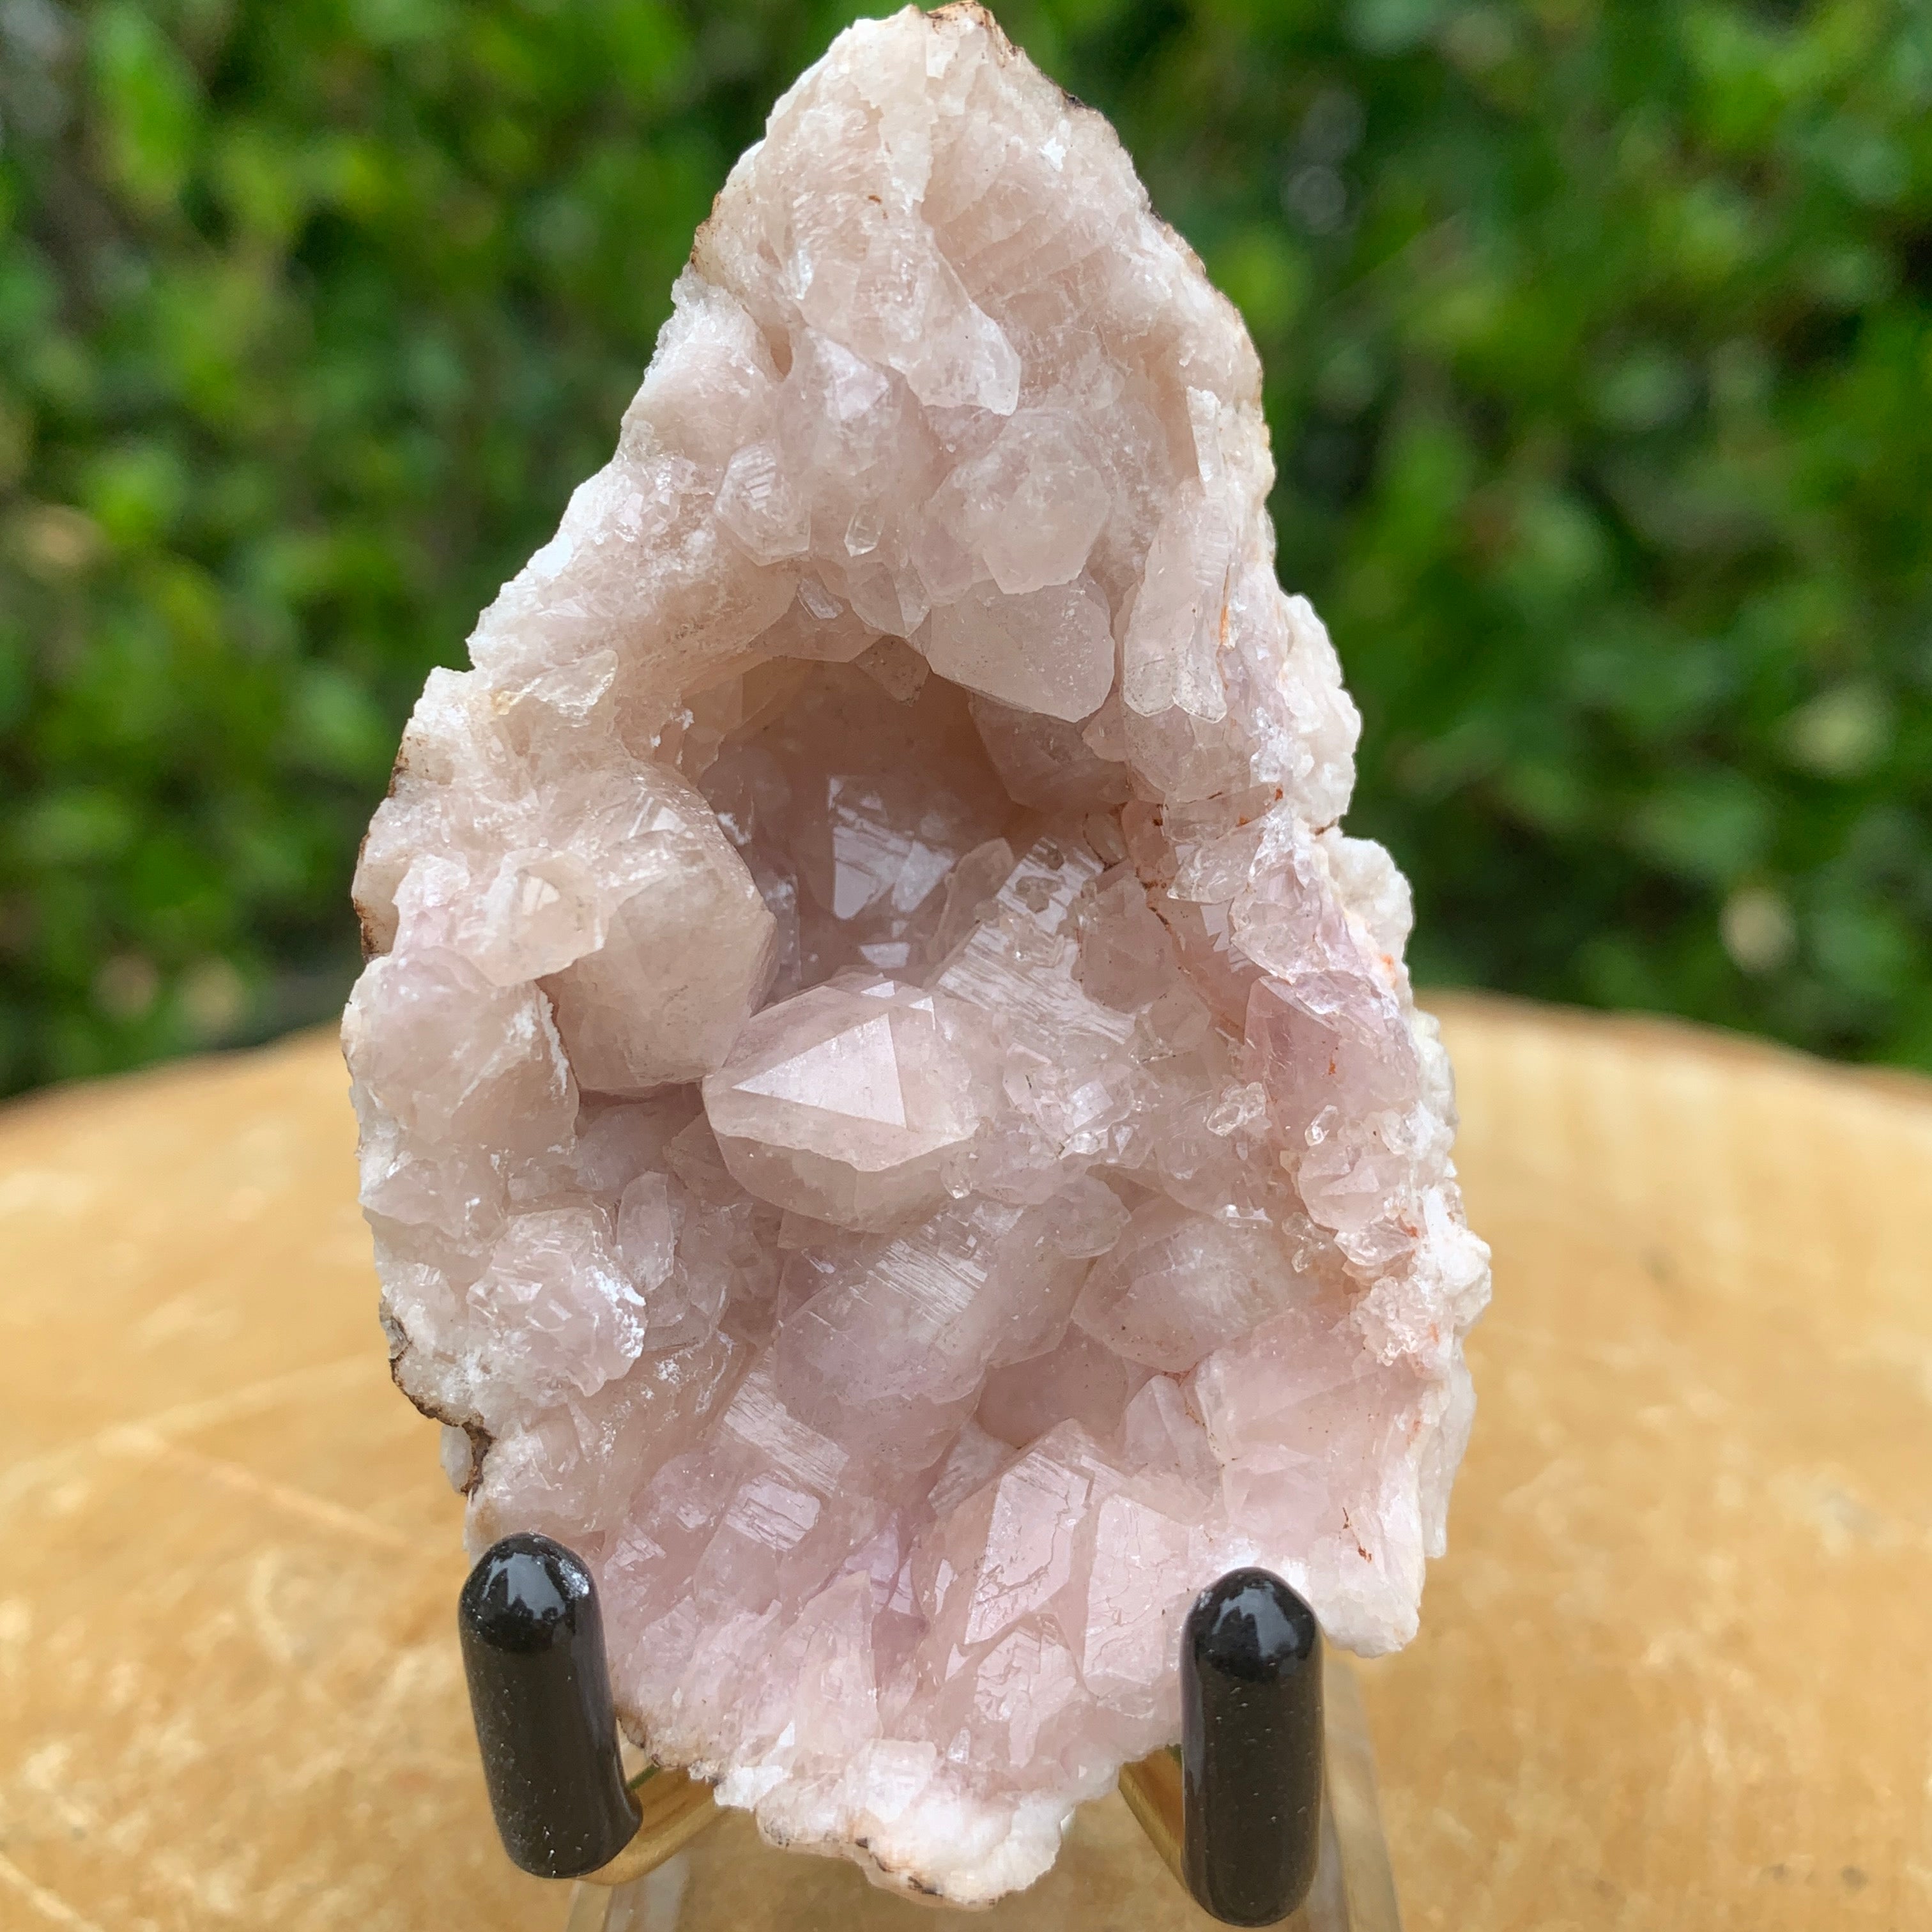 42.0g 6x4x2cm Pink Pink Amethyst from Argentina